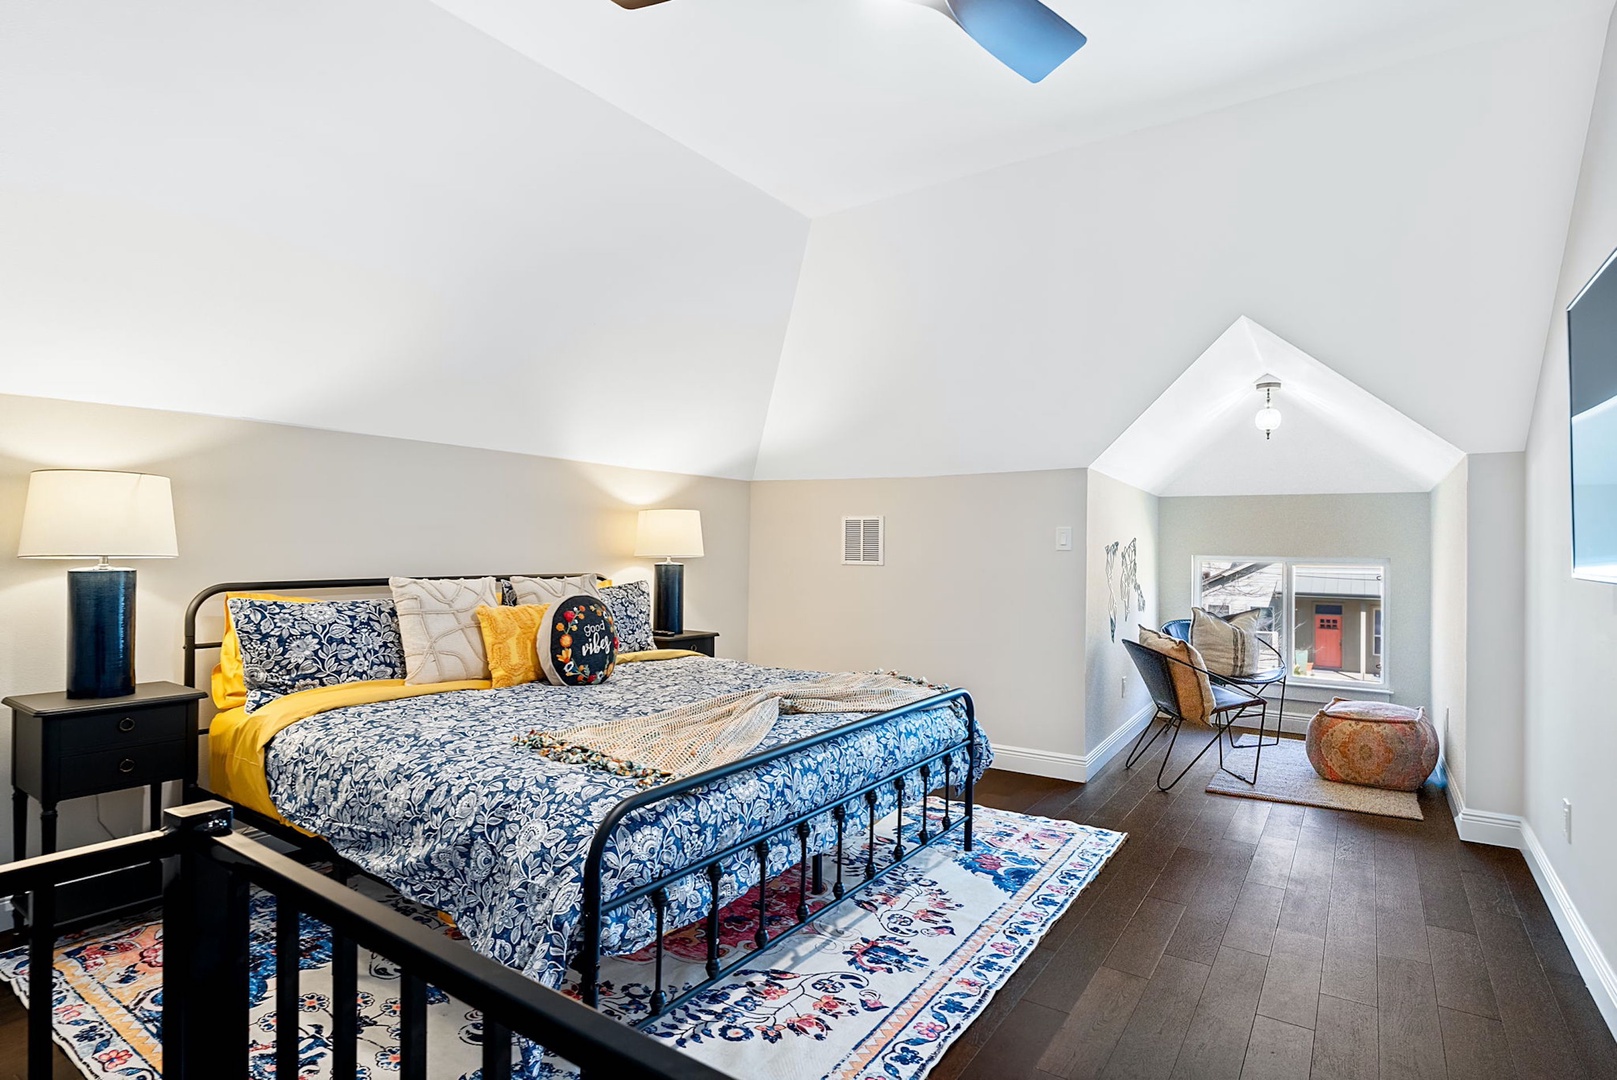 Enjoy the private space in the loft complete with king bed, TV & nook